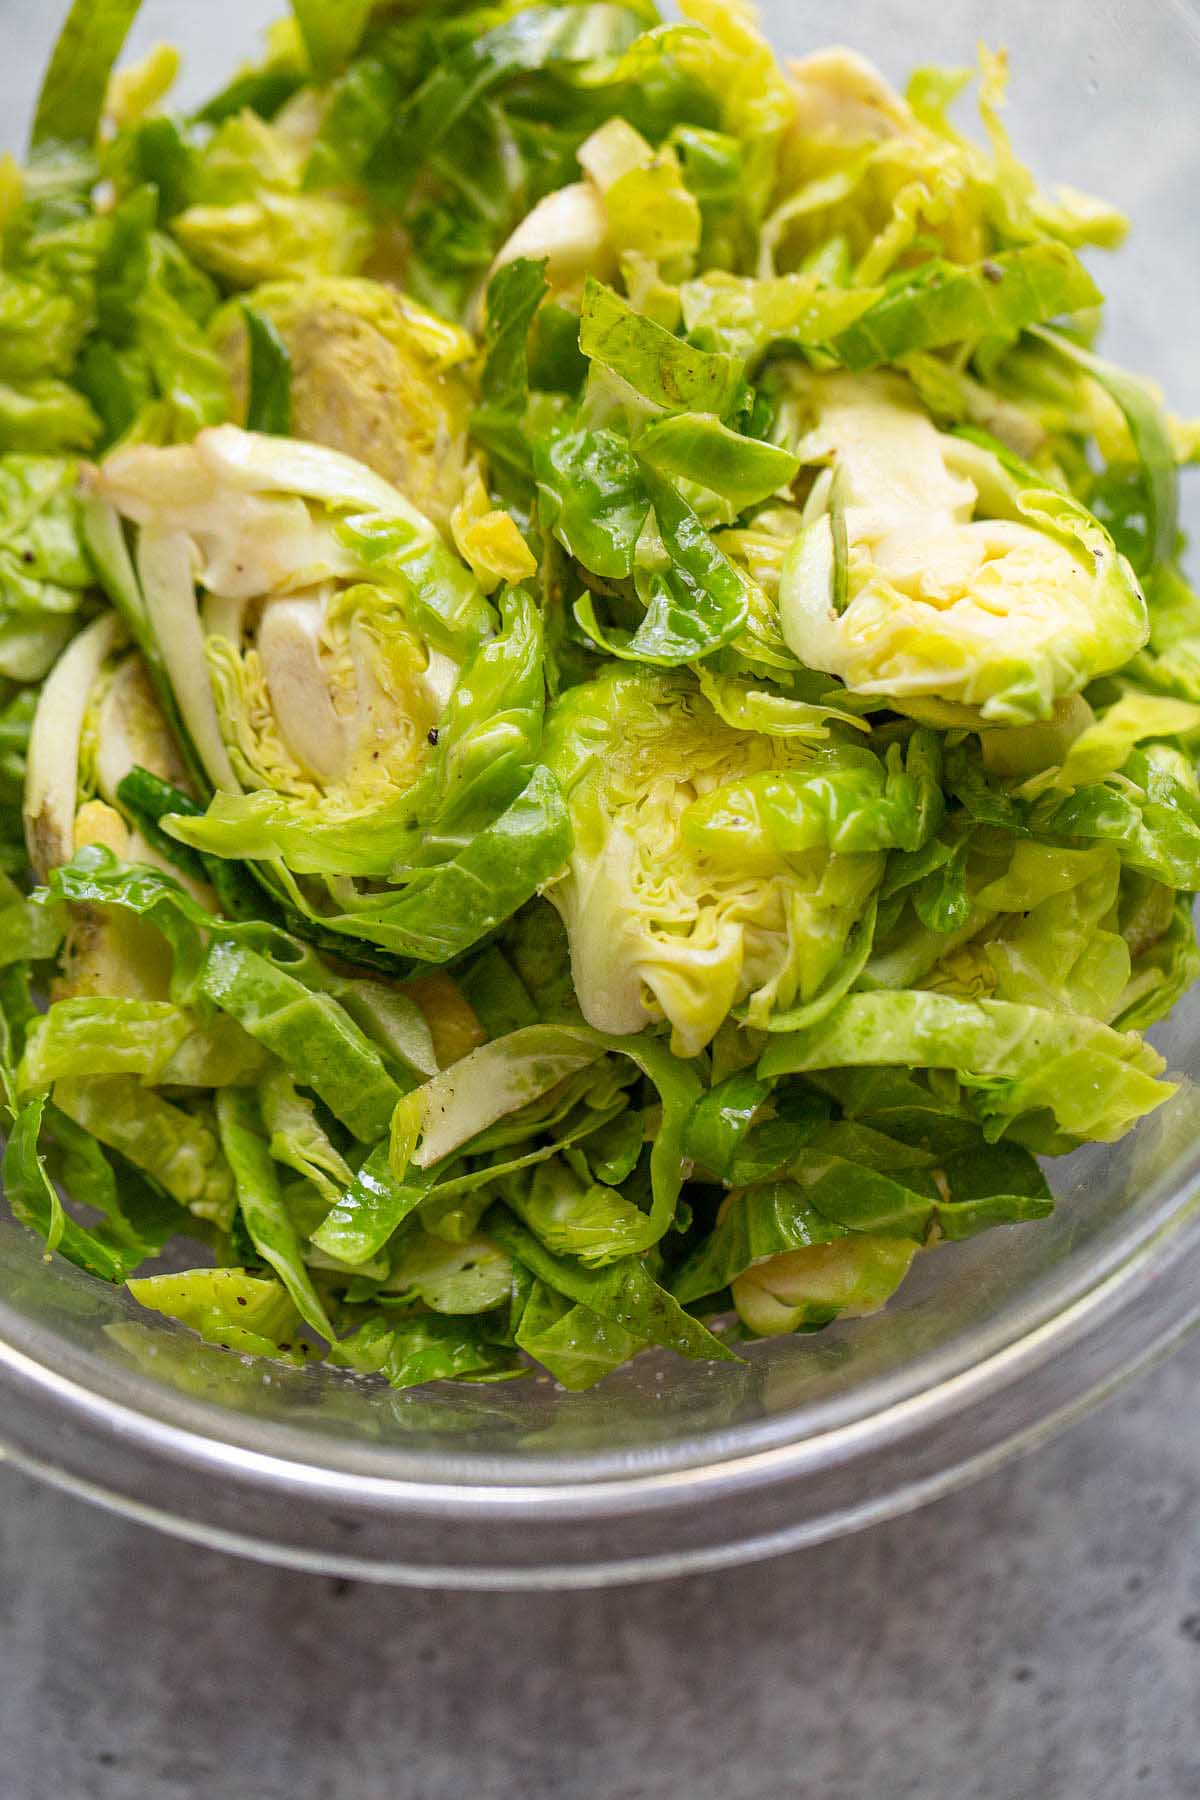 Brussels sprouts tossed with olive oil.